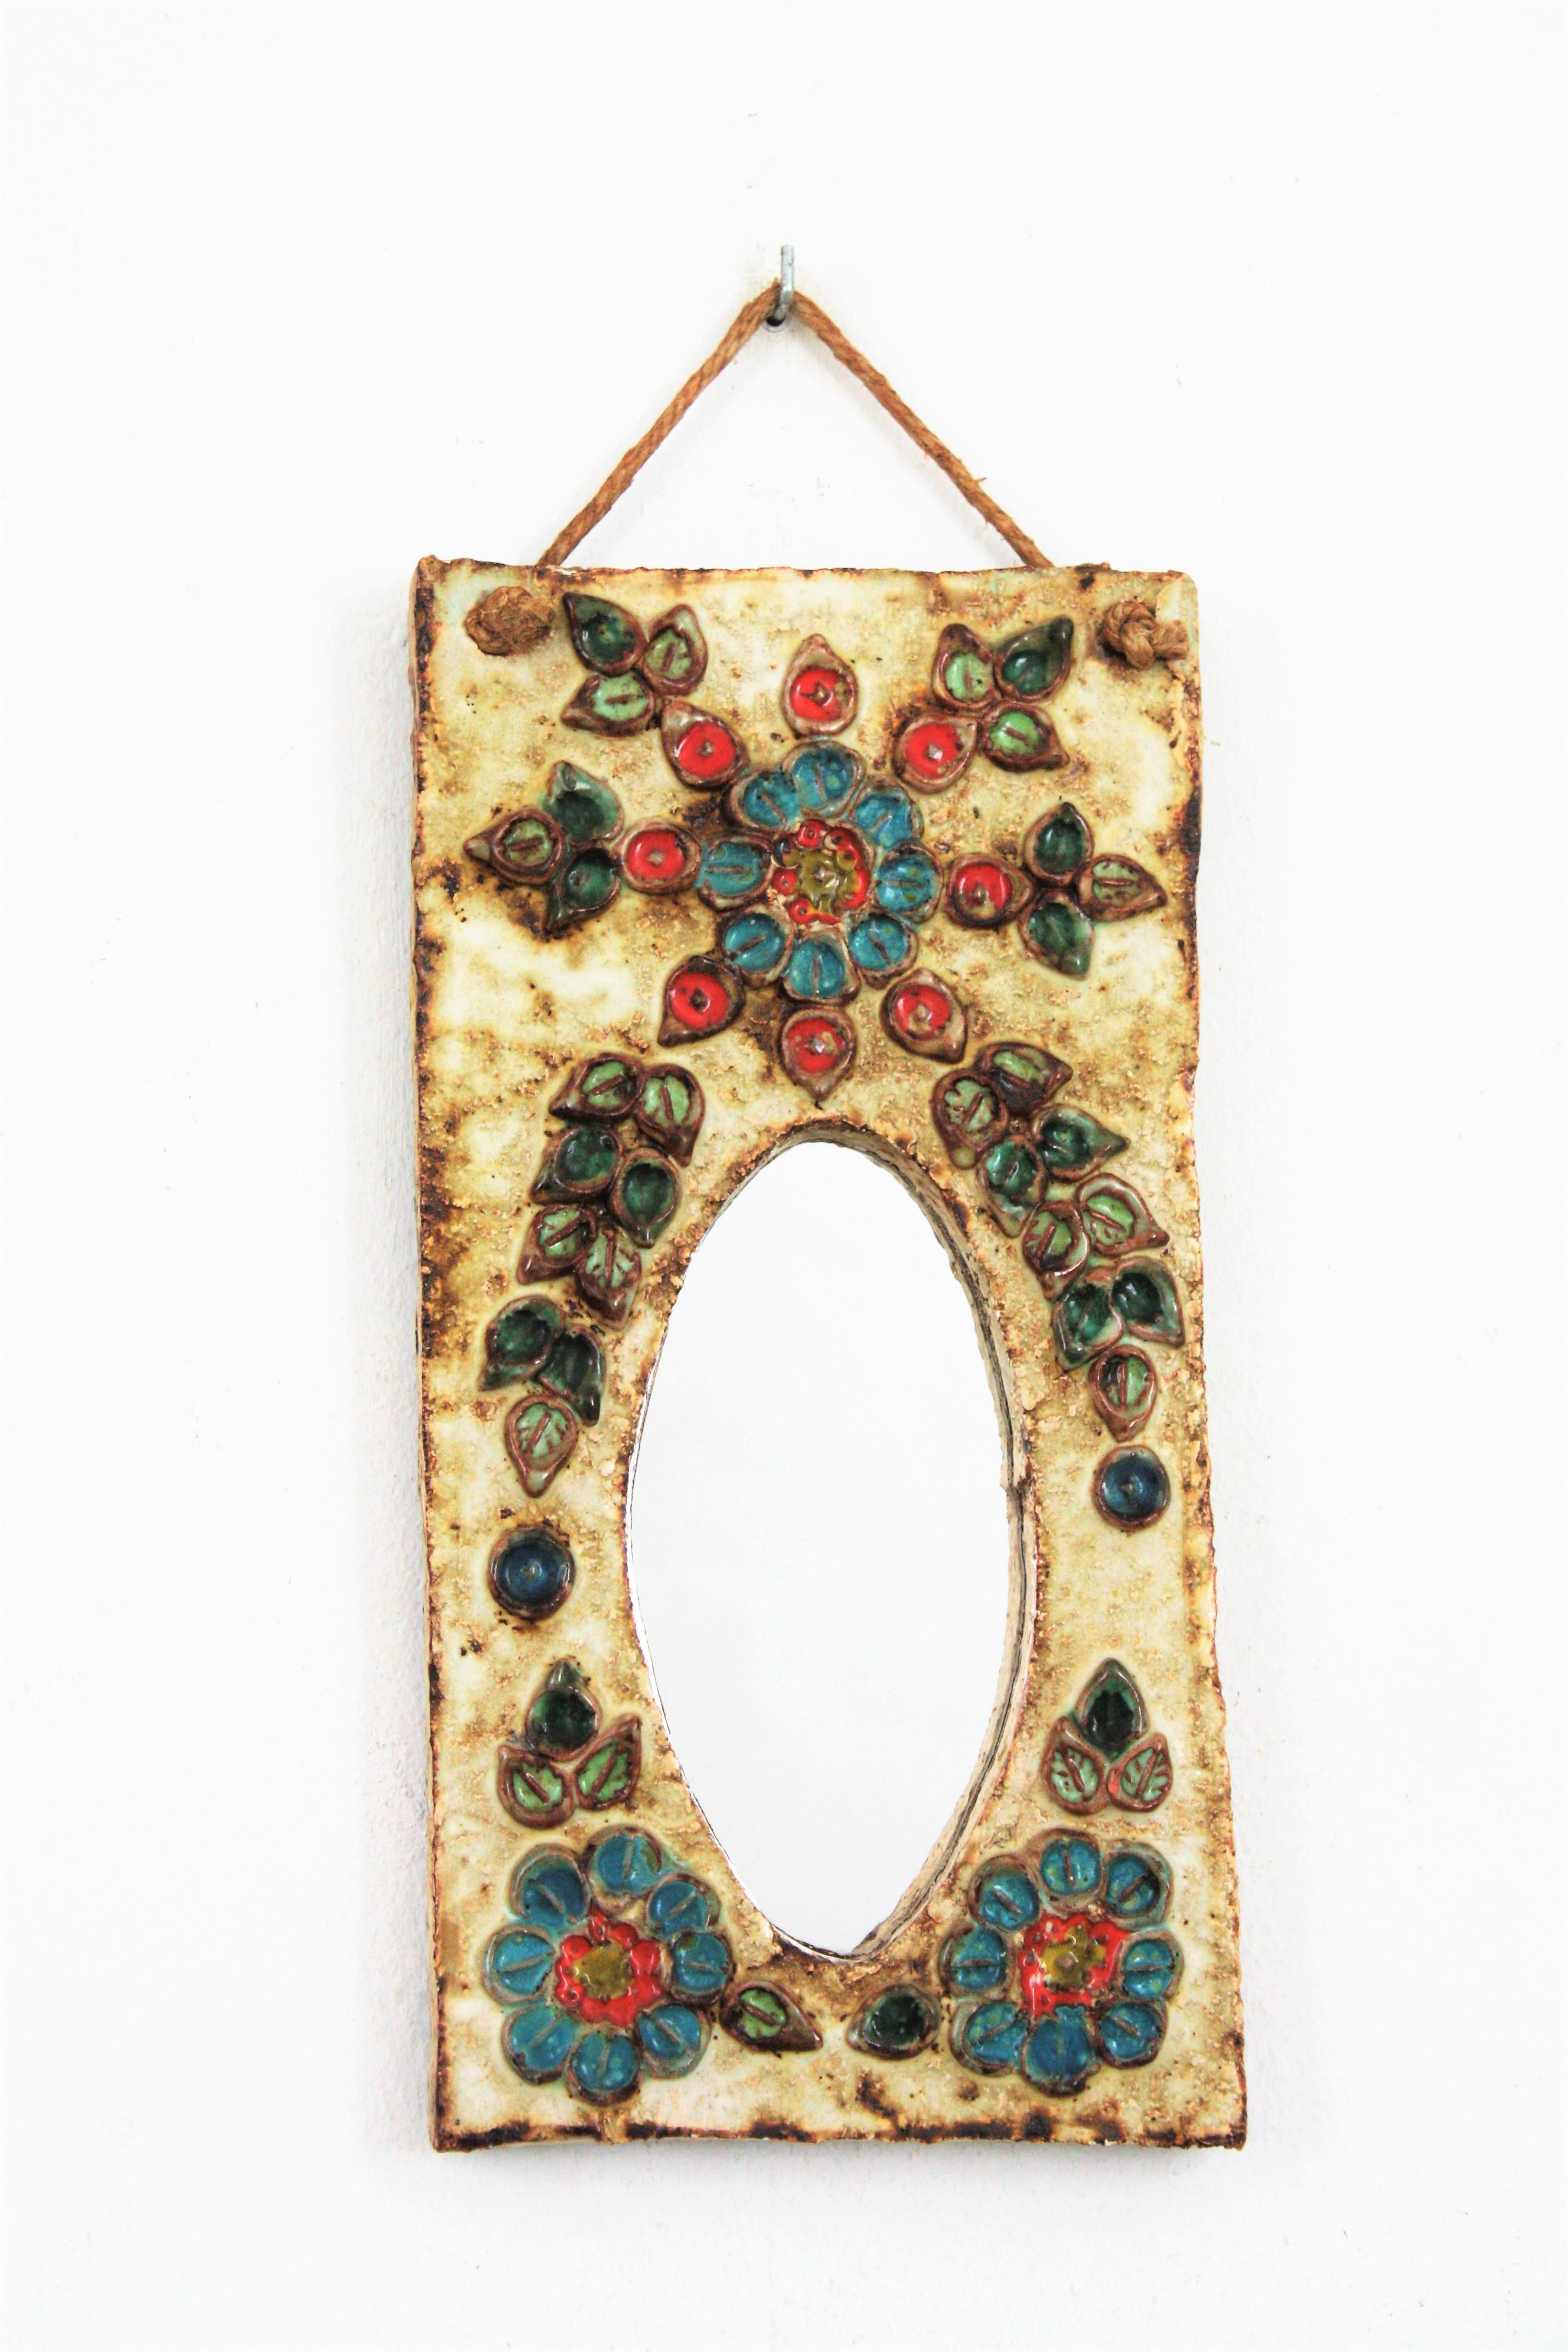 A glazed ivory color ceramic mirror with colorful flowers decorating the frame. Attributed to La Roue-Vallauris. France, 1950-1960.
This pretty beautiful mirror has midcentury and rustic accents. Small flowers in orange and blue colors and a